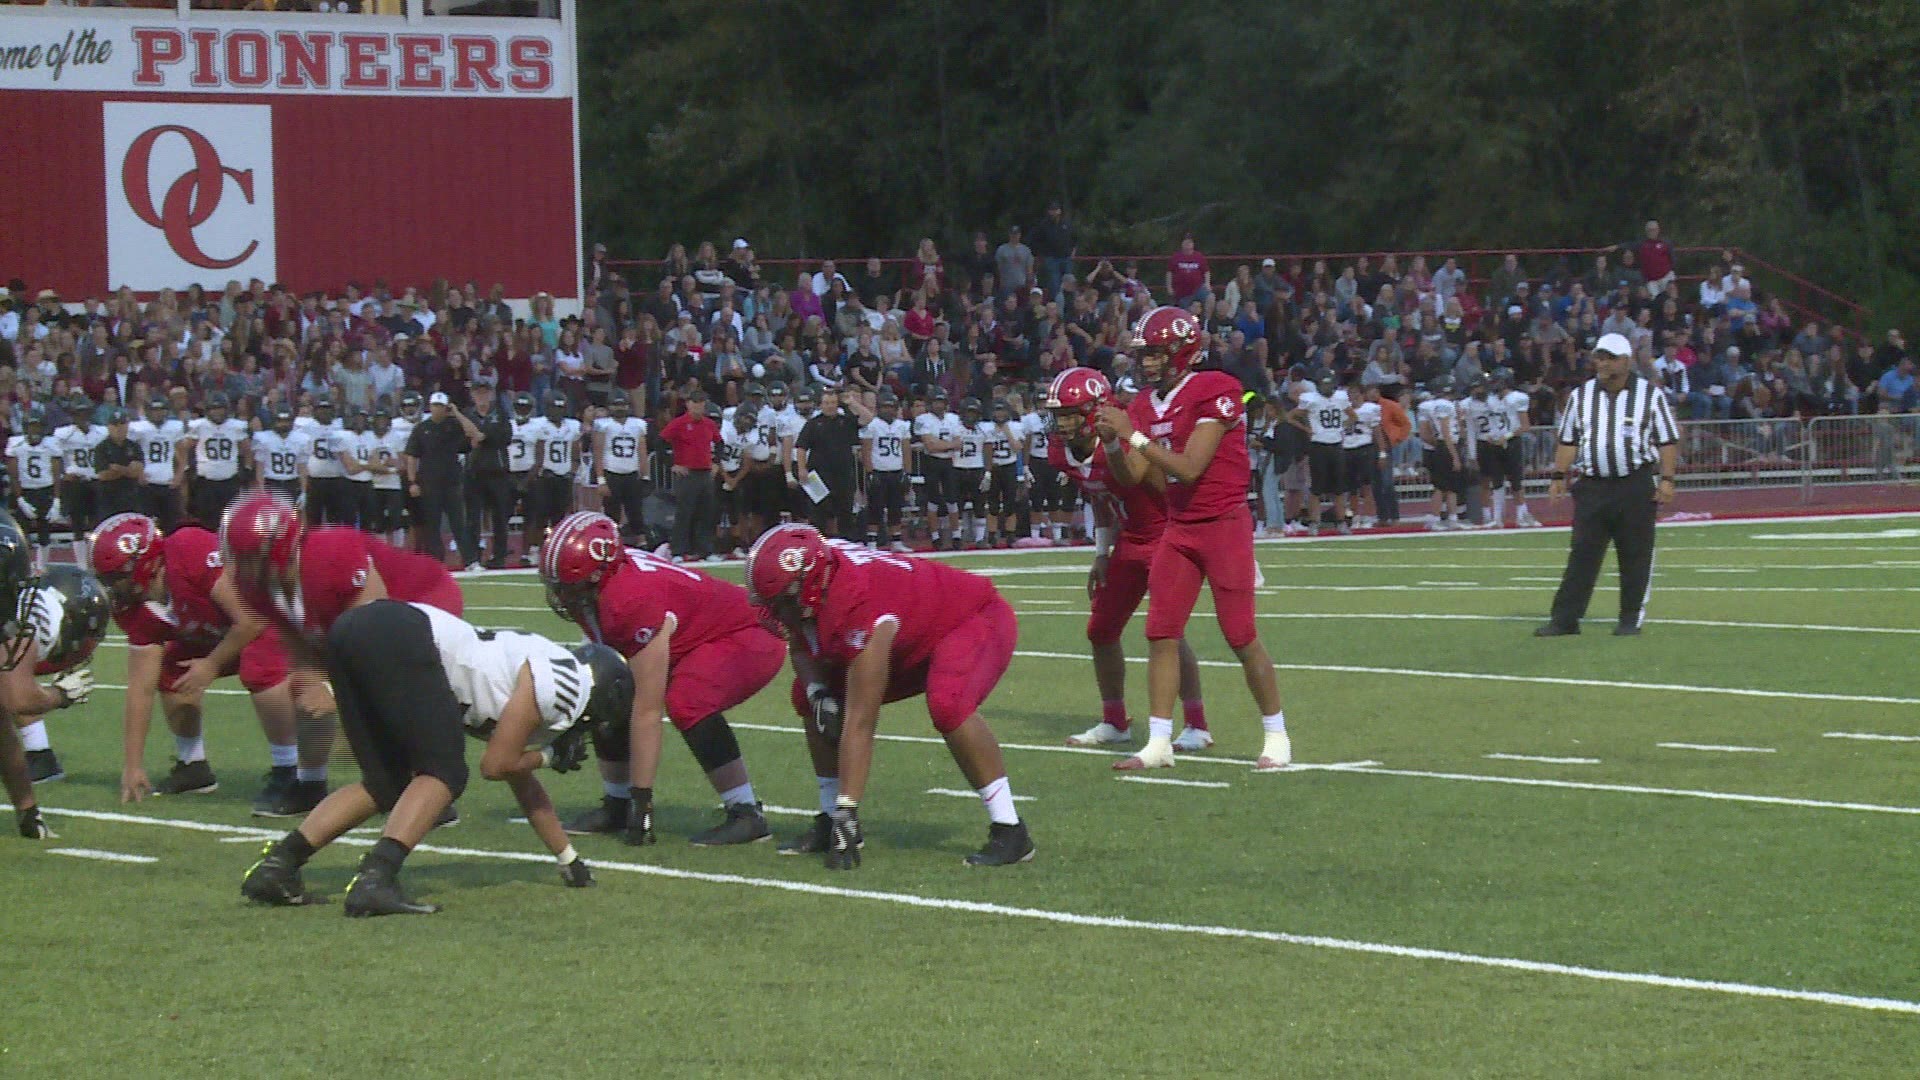 Highlights of the Oregon City Pioneers' 2018 season in Oregon. The Pioneers finished with a 5-6 record. All highlights aired on KGW's Friday Night Flights #KGWPreps